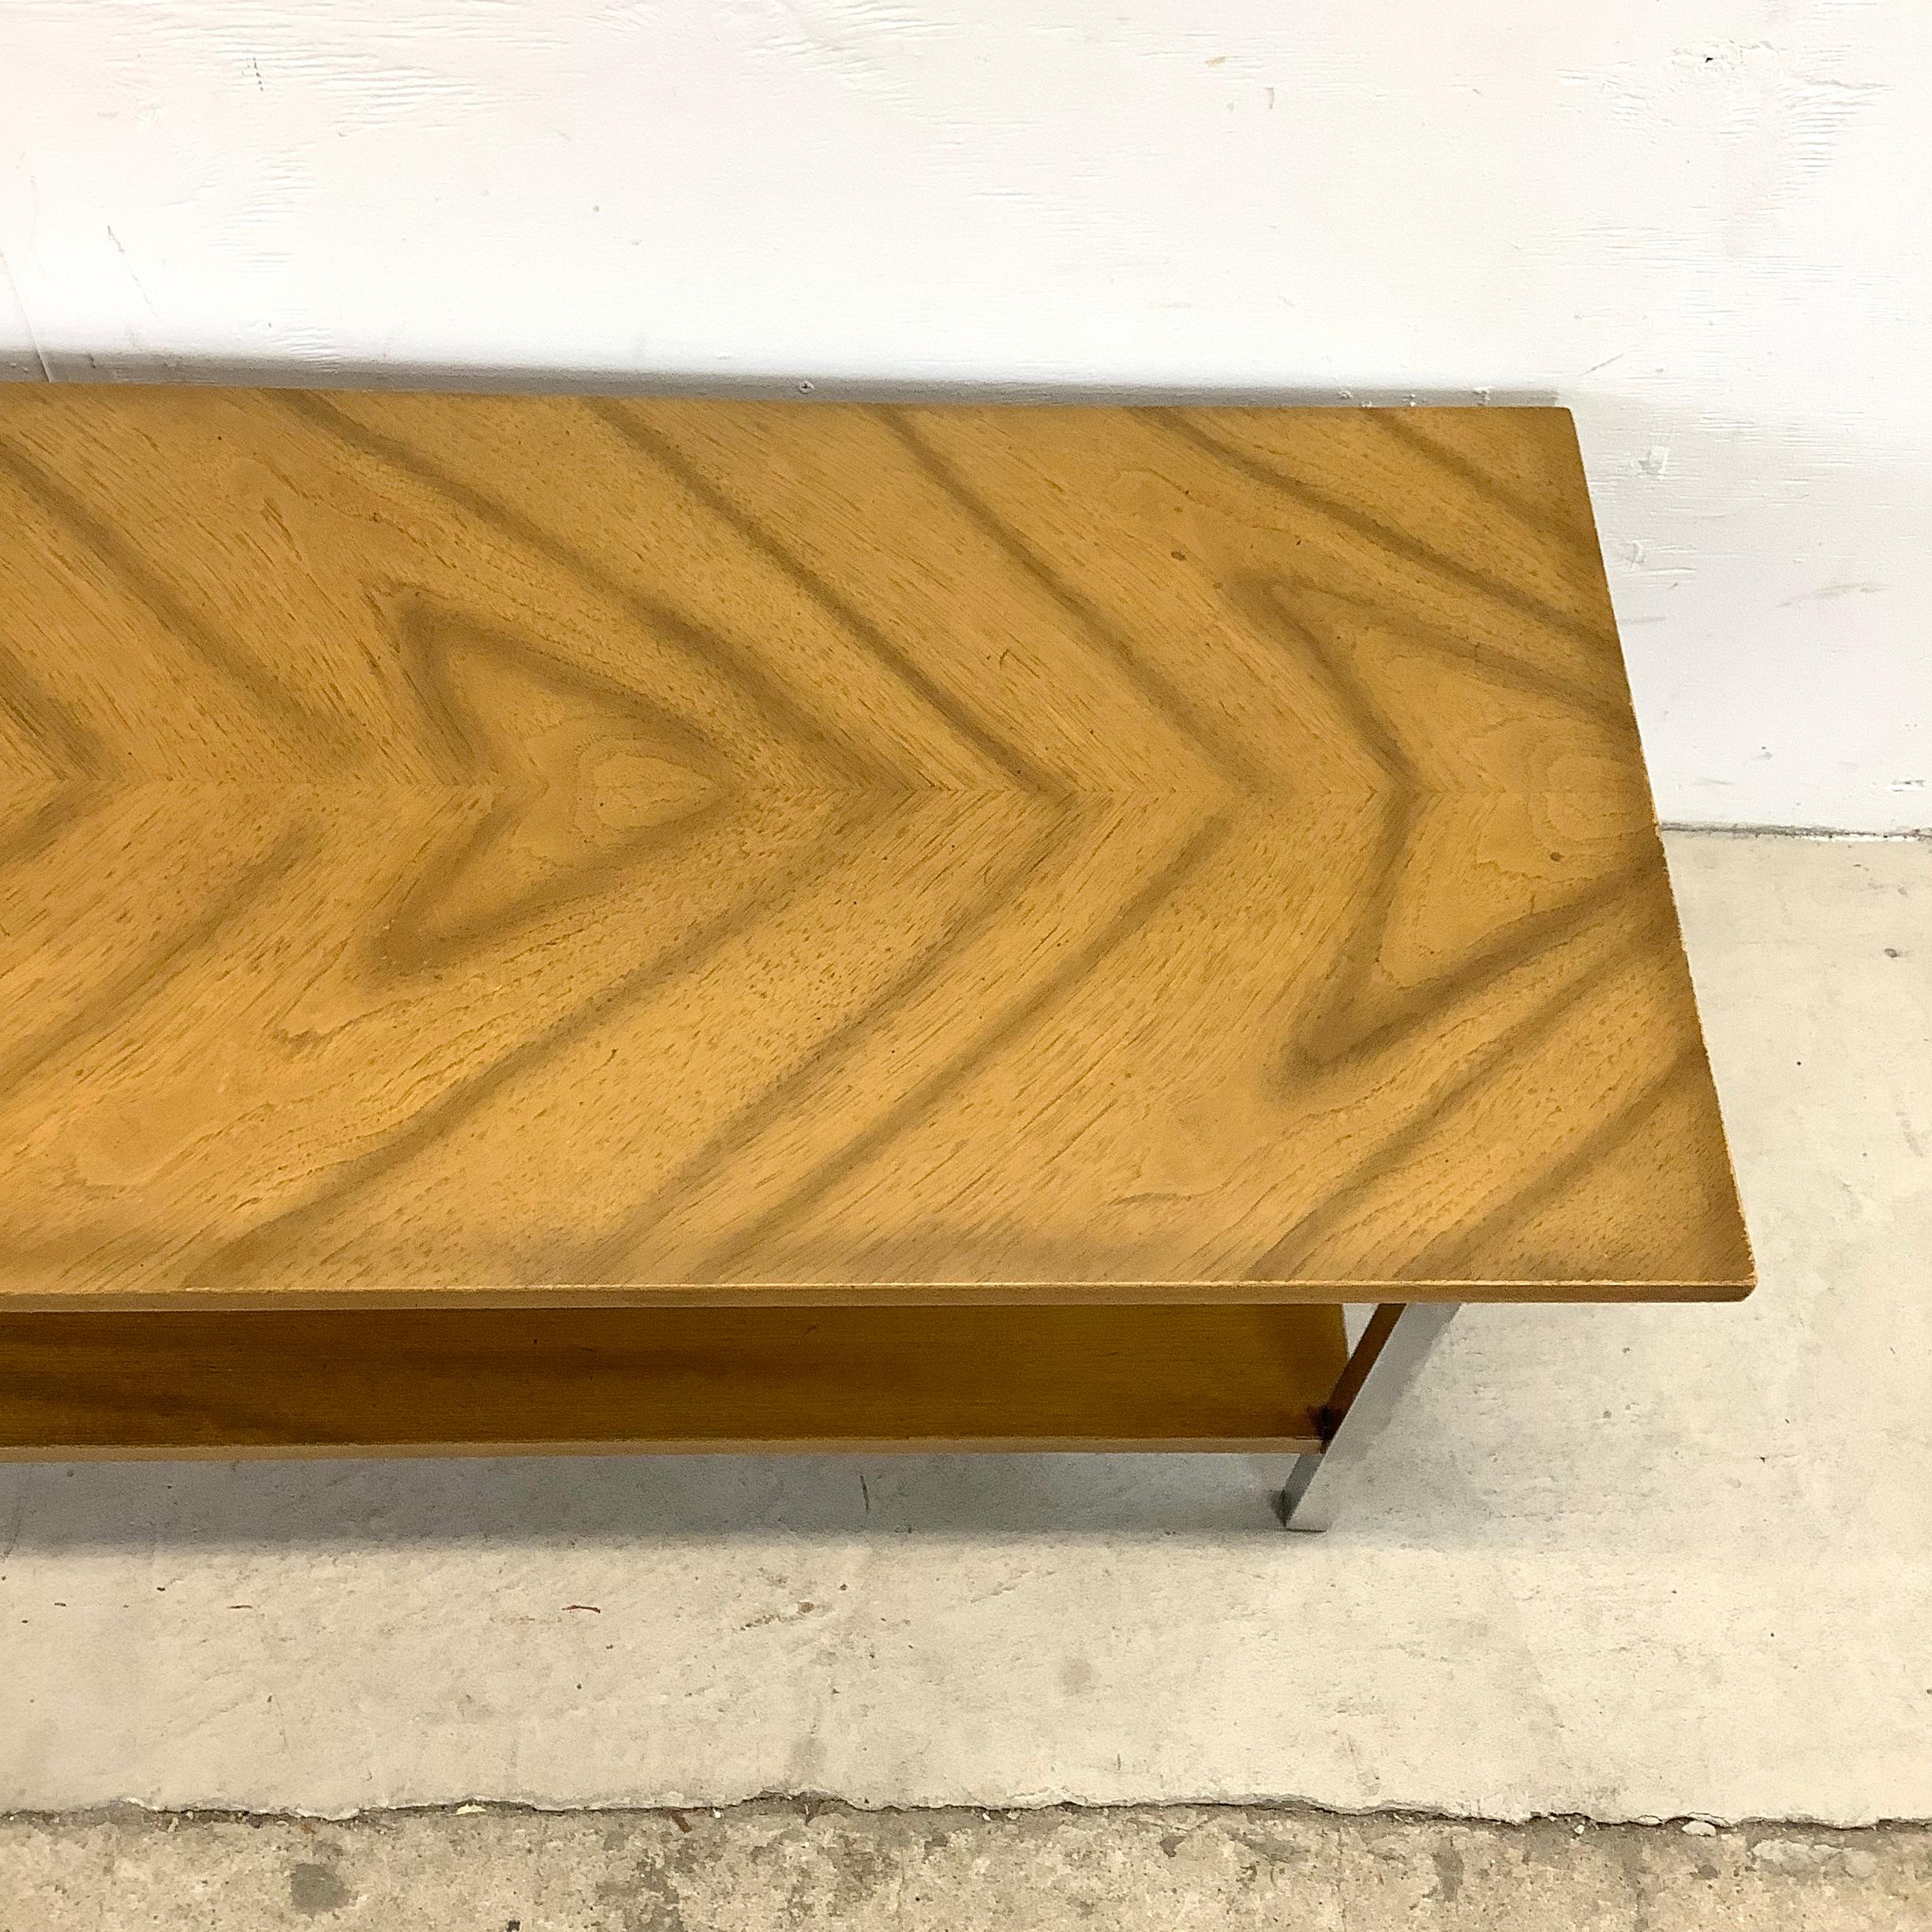 Midcentury Two Tier Coffee Table In Good Condition For Sale In Trenton, NJ